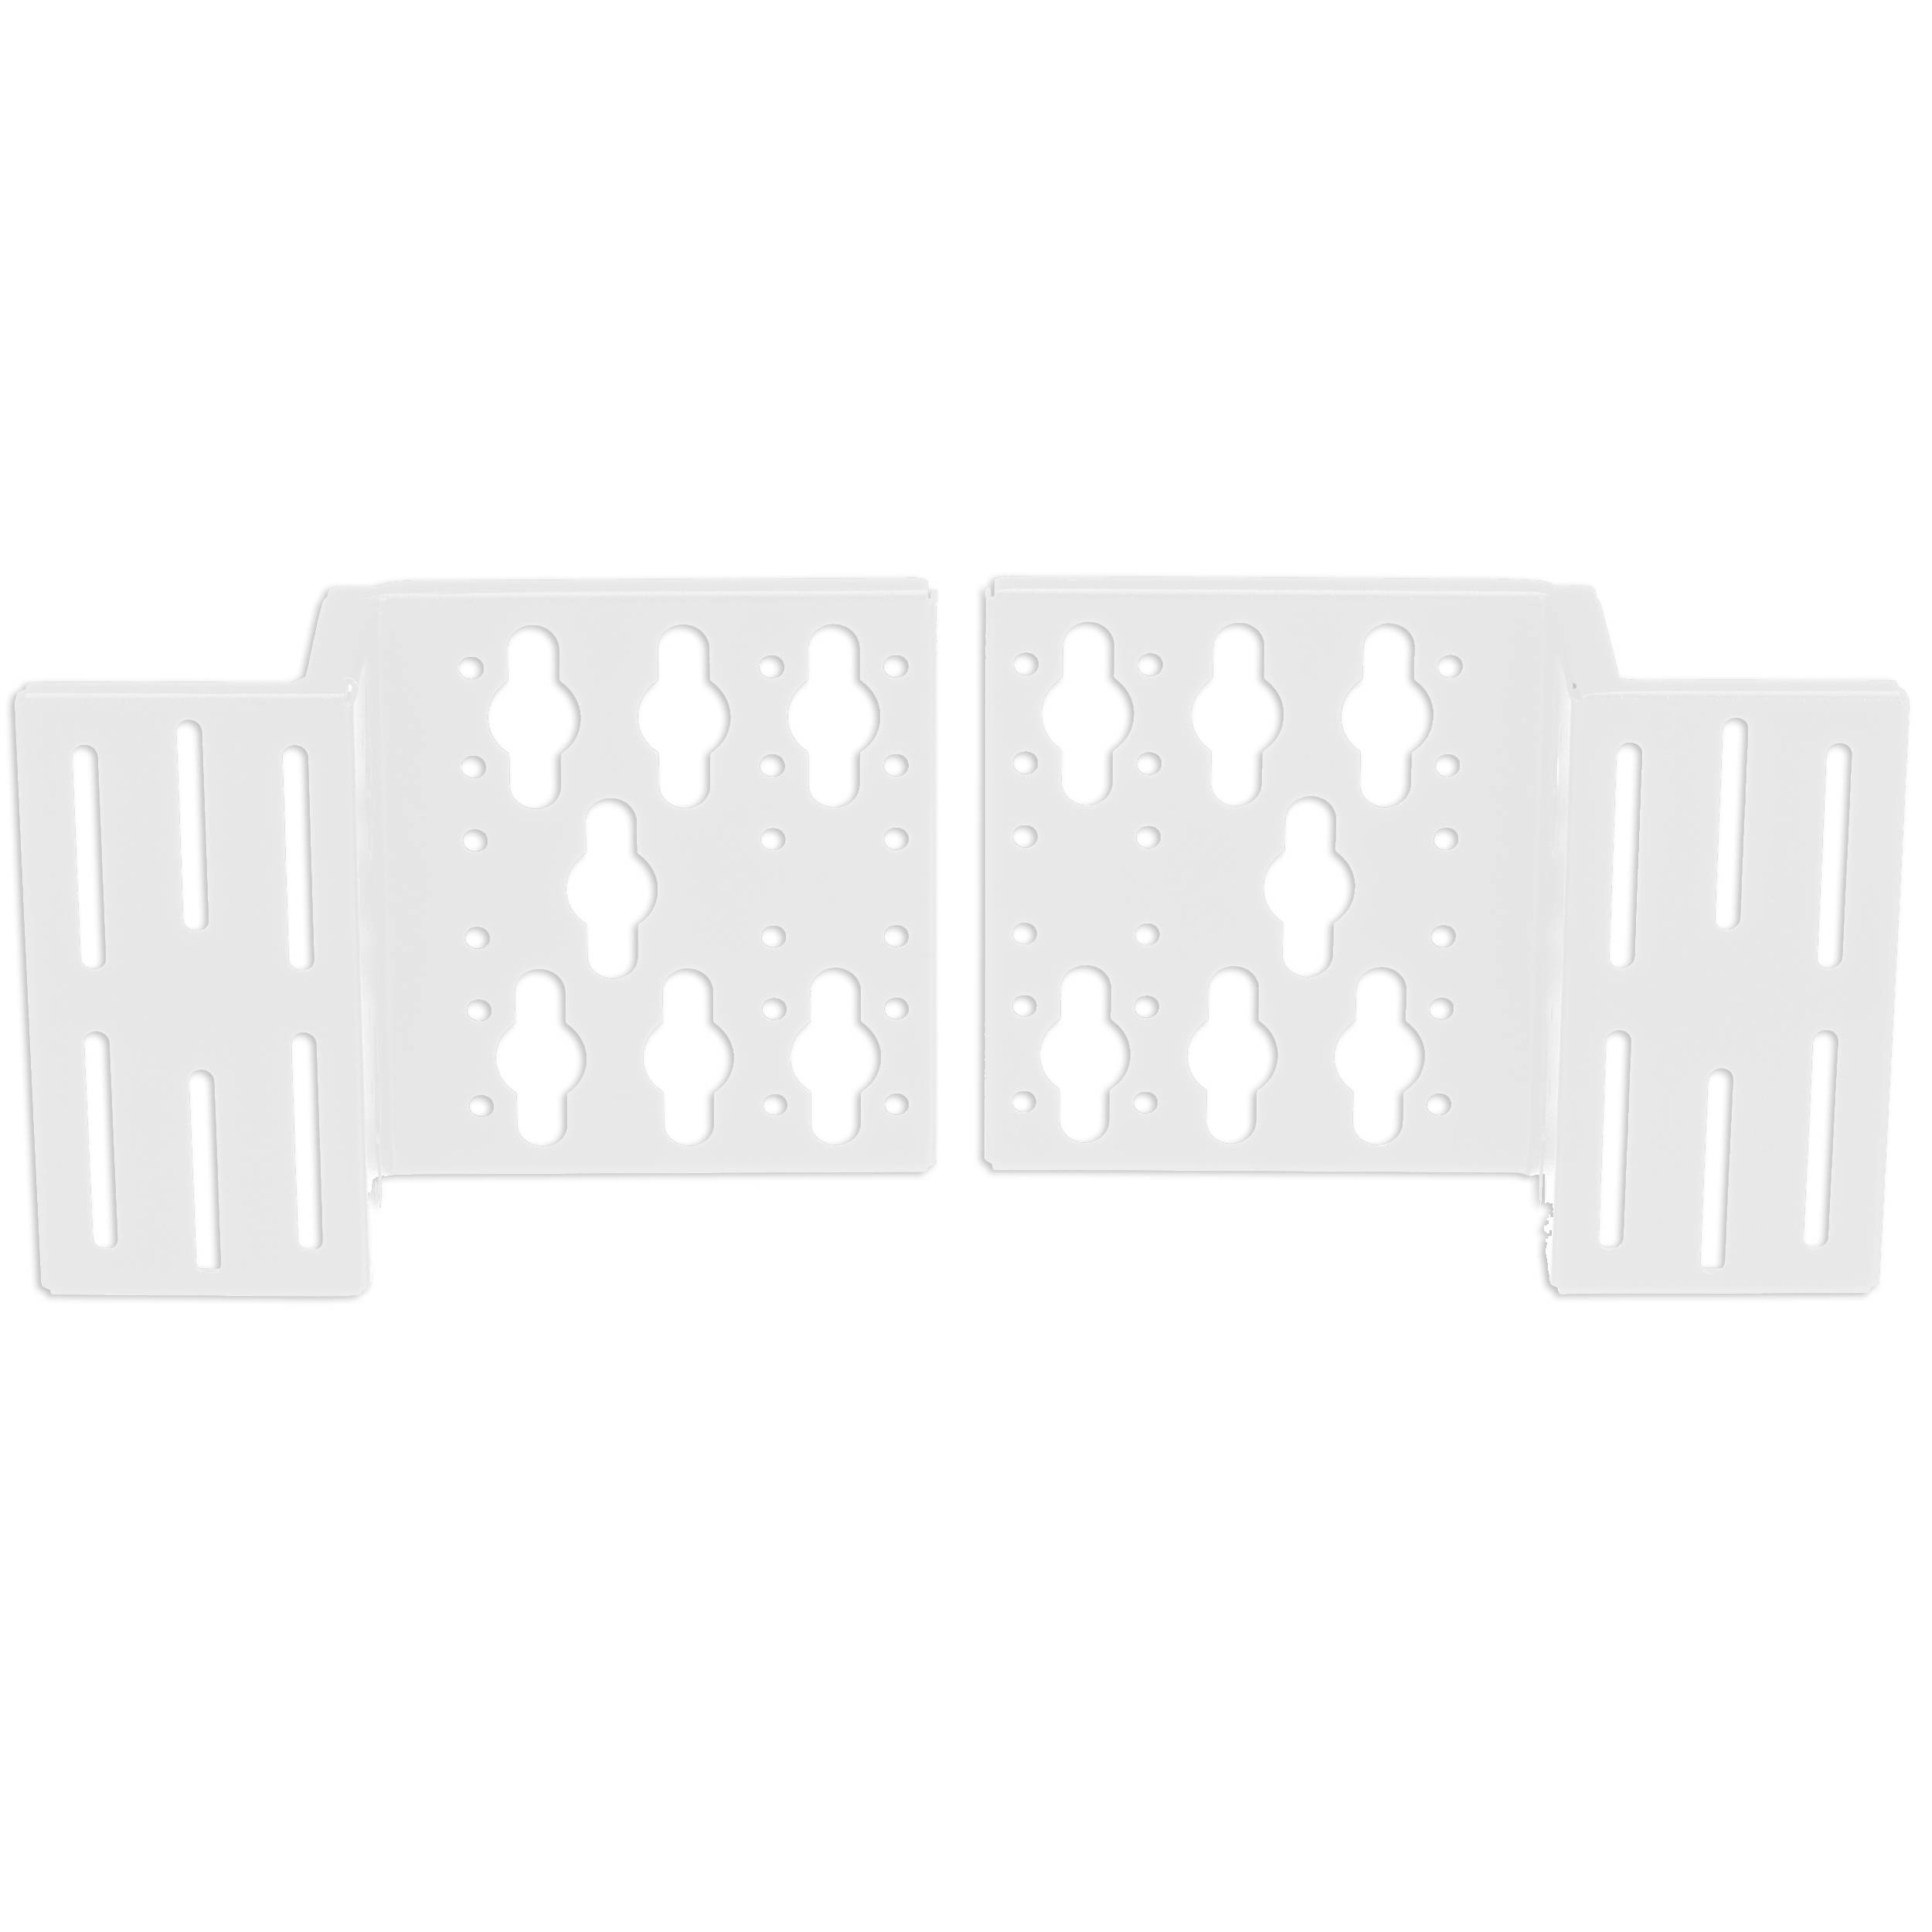 Panduit® CVPDUBWH Vertical Bracket Kit, For Use With Power Distribution Units (PDUs) and R4P Style 4 Post Racks, Steel, White